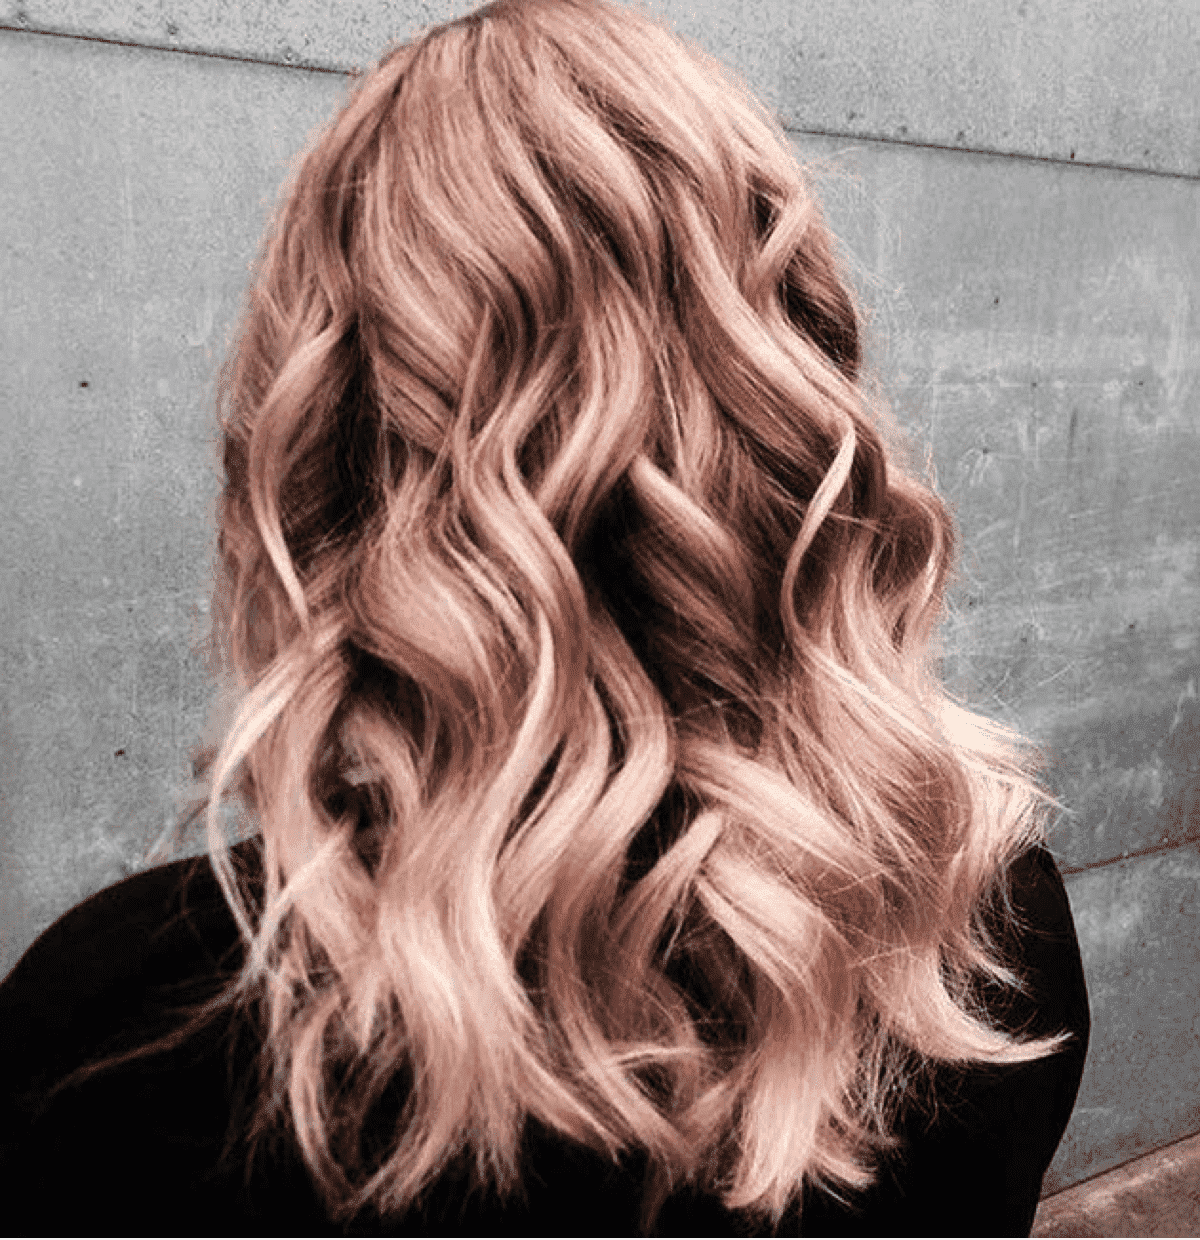 20 Natural Looking Shades of Strawberry Blonde Hair Color Ideas